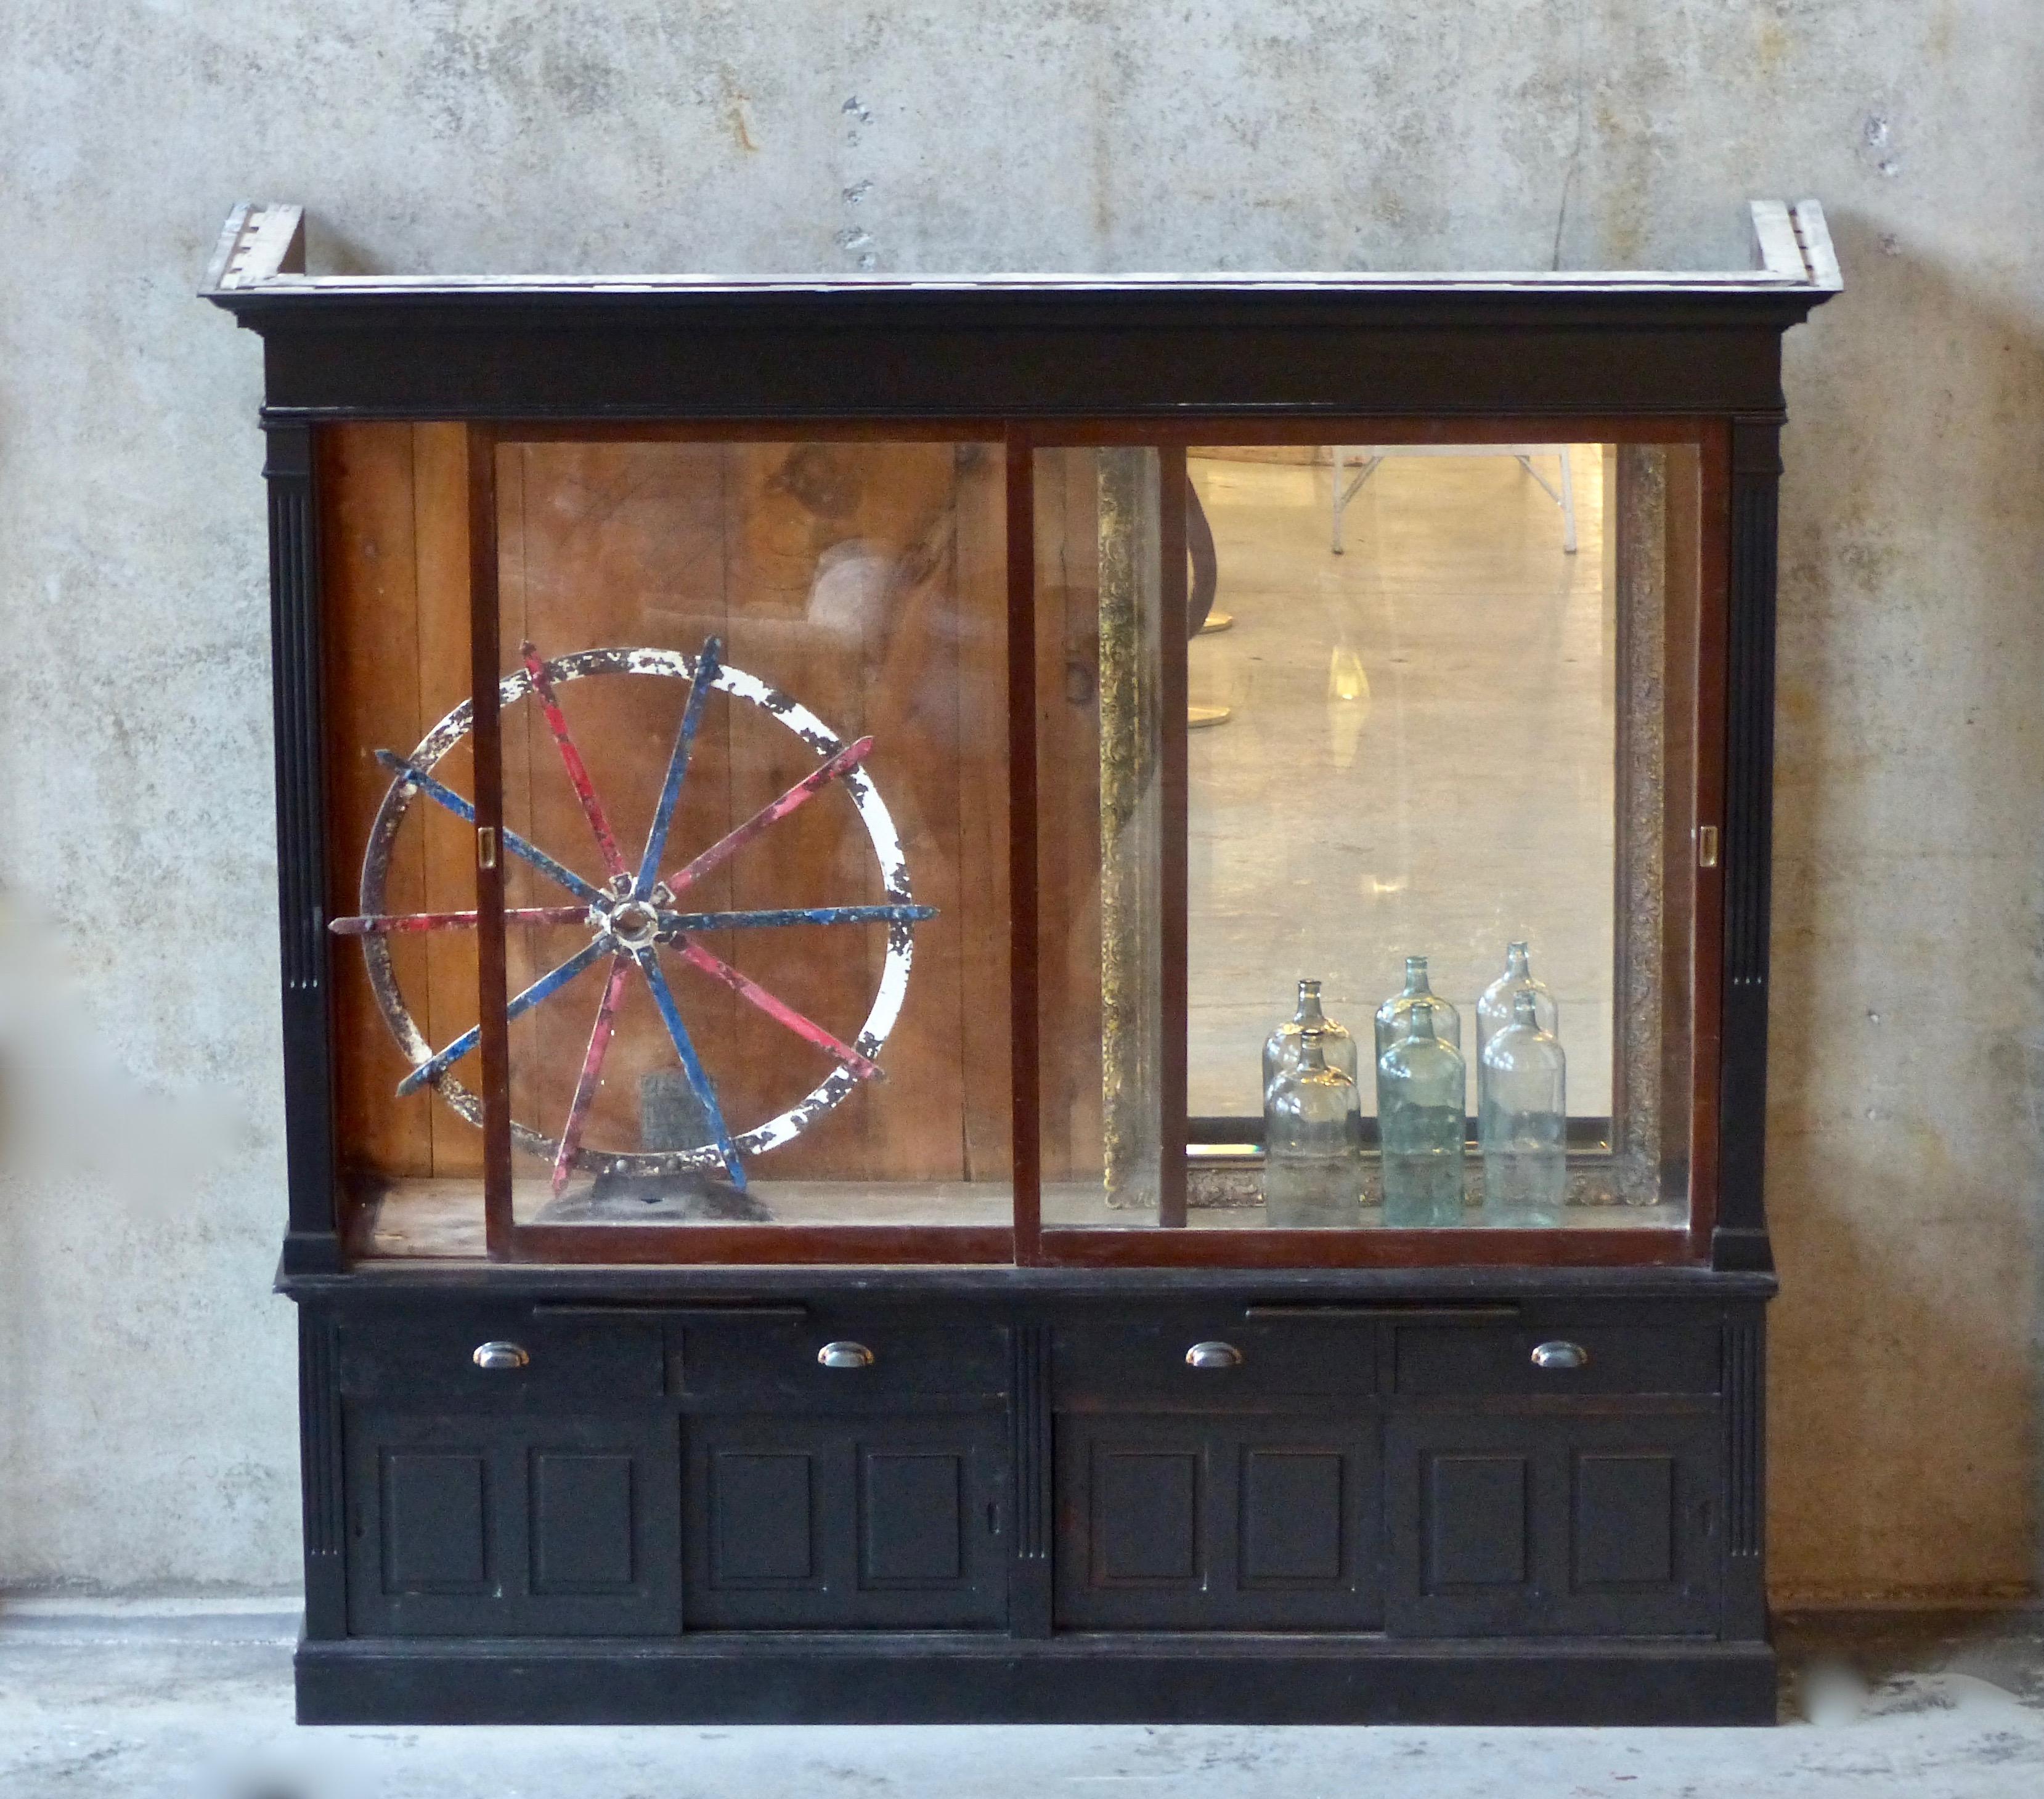 Glass 1920 Art Deco Retail Mercantile Store Display Cabinet